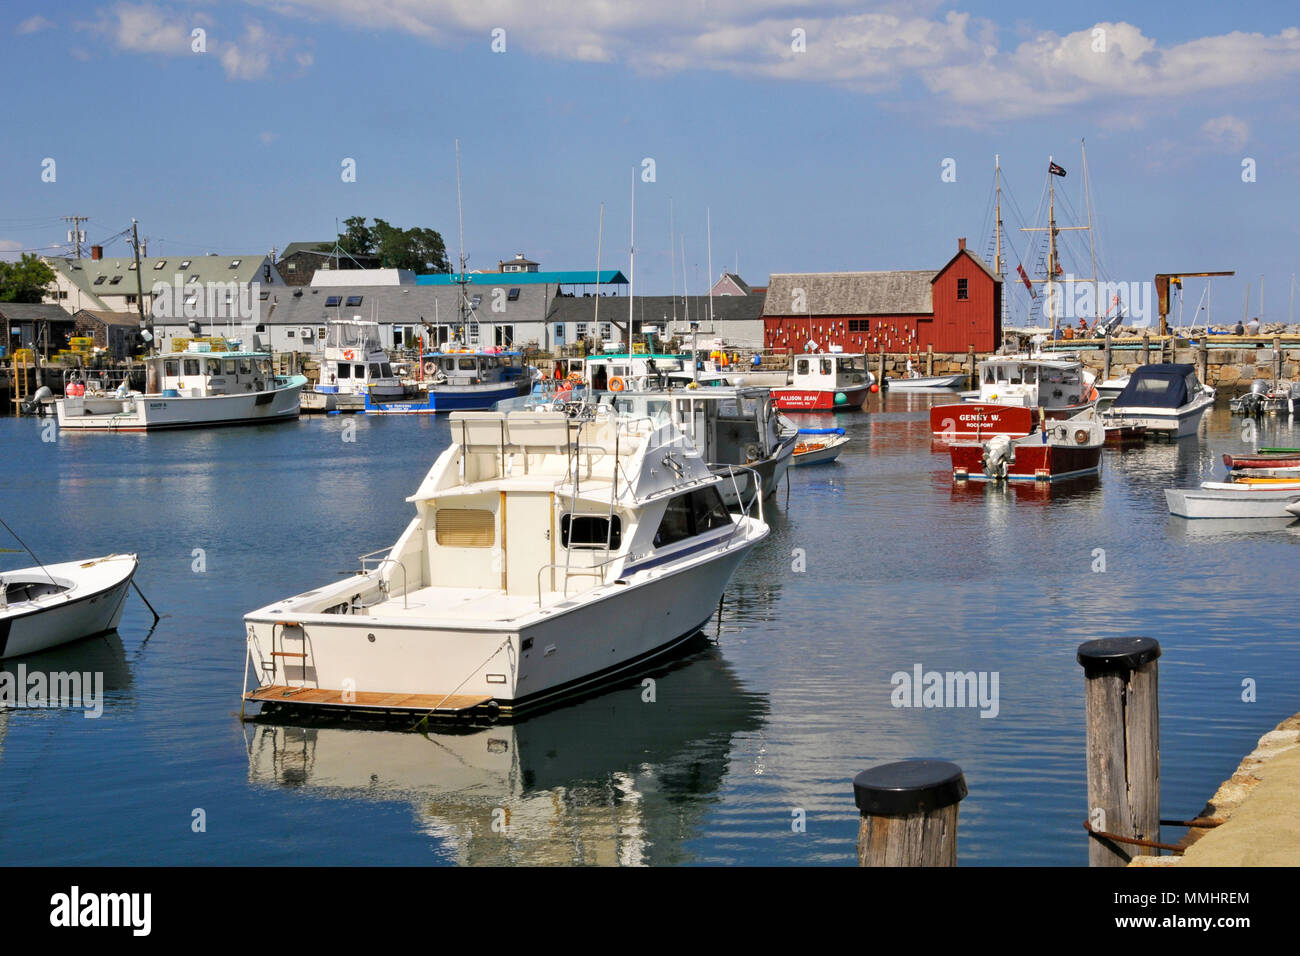 View of Rockport Harbor with famous Motif #1 red shack, Rockport, Massachusetts, USA Stock Photo